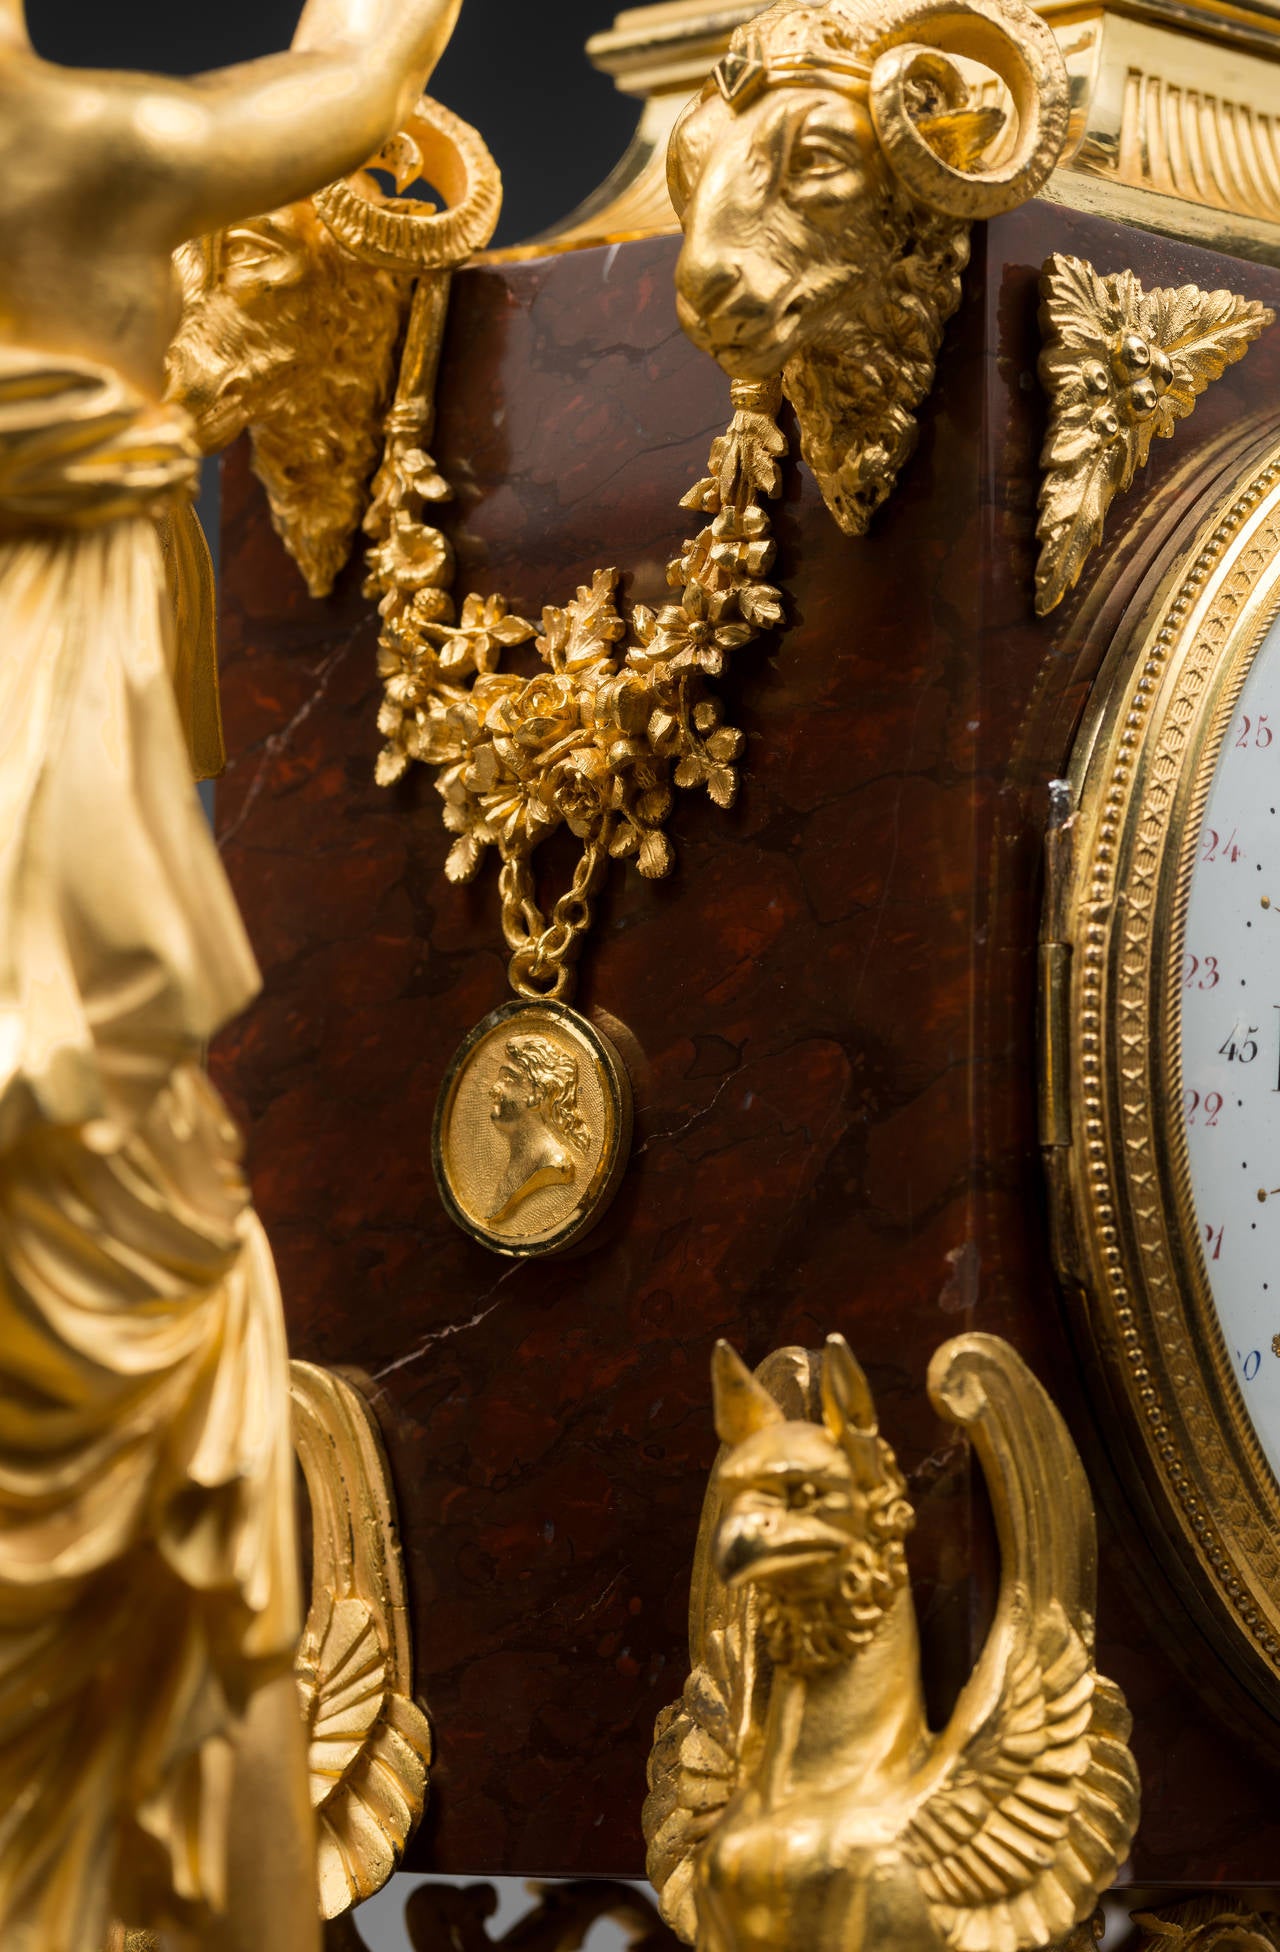 Gilt Louis XVI Mantel Clock by Lamiral, Dial by Coteau, Case Attributed to Thomire